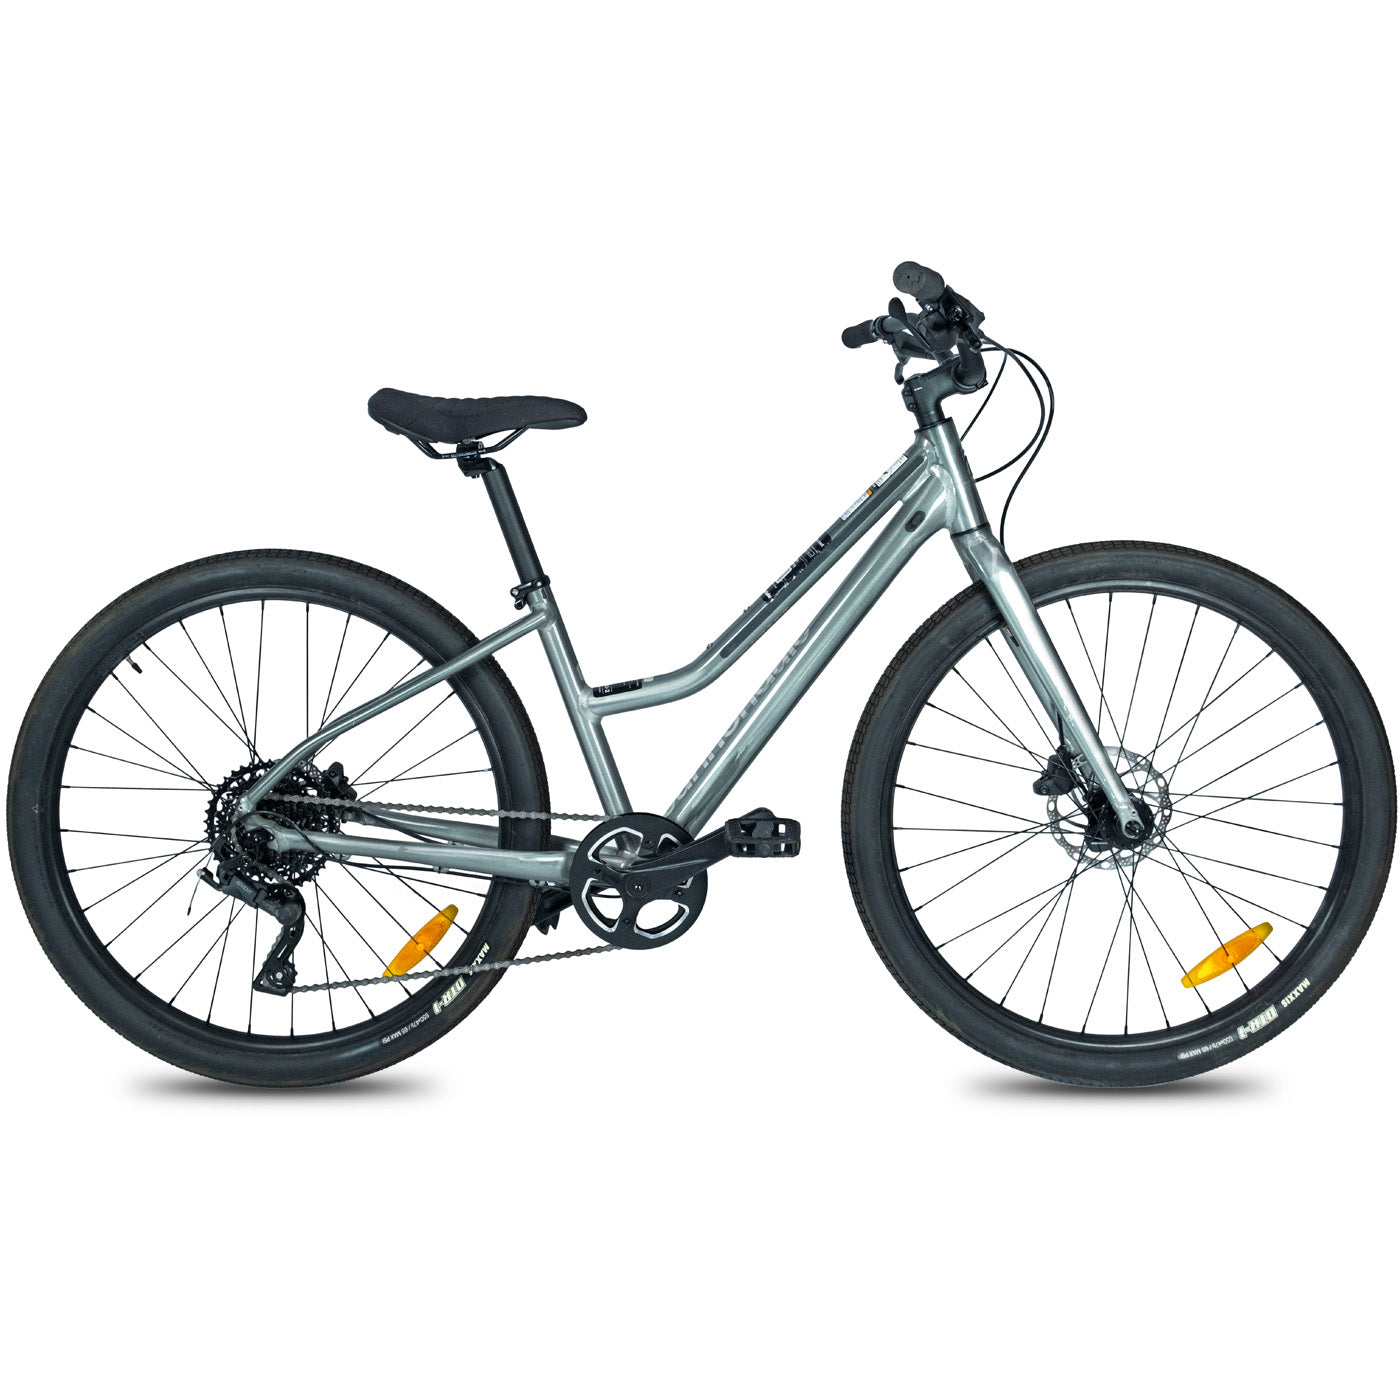 Cannondale Treadwell 2 - Grey | All4cycling